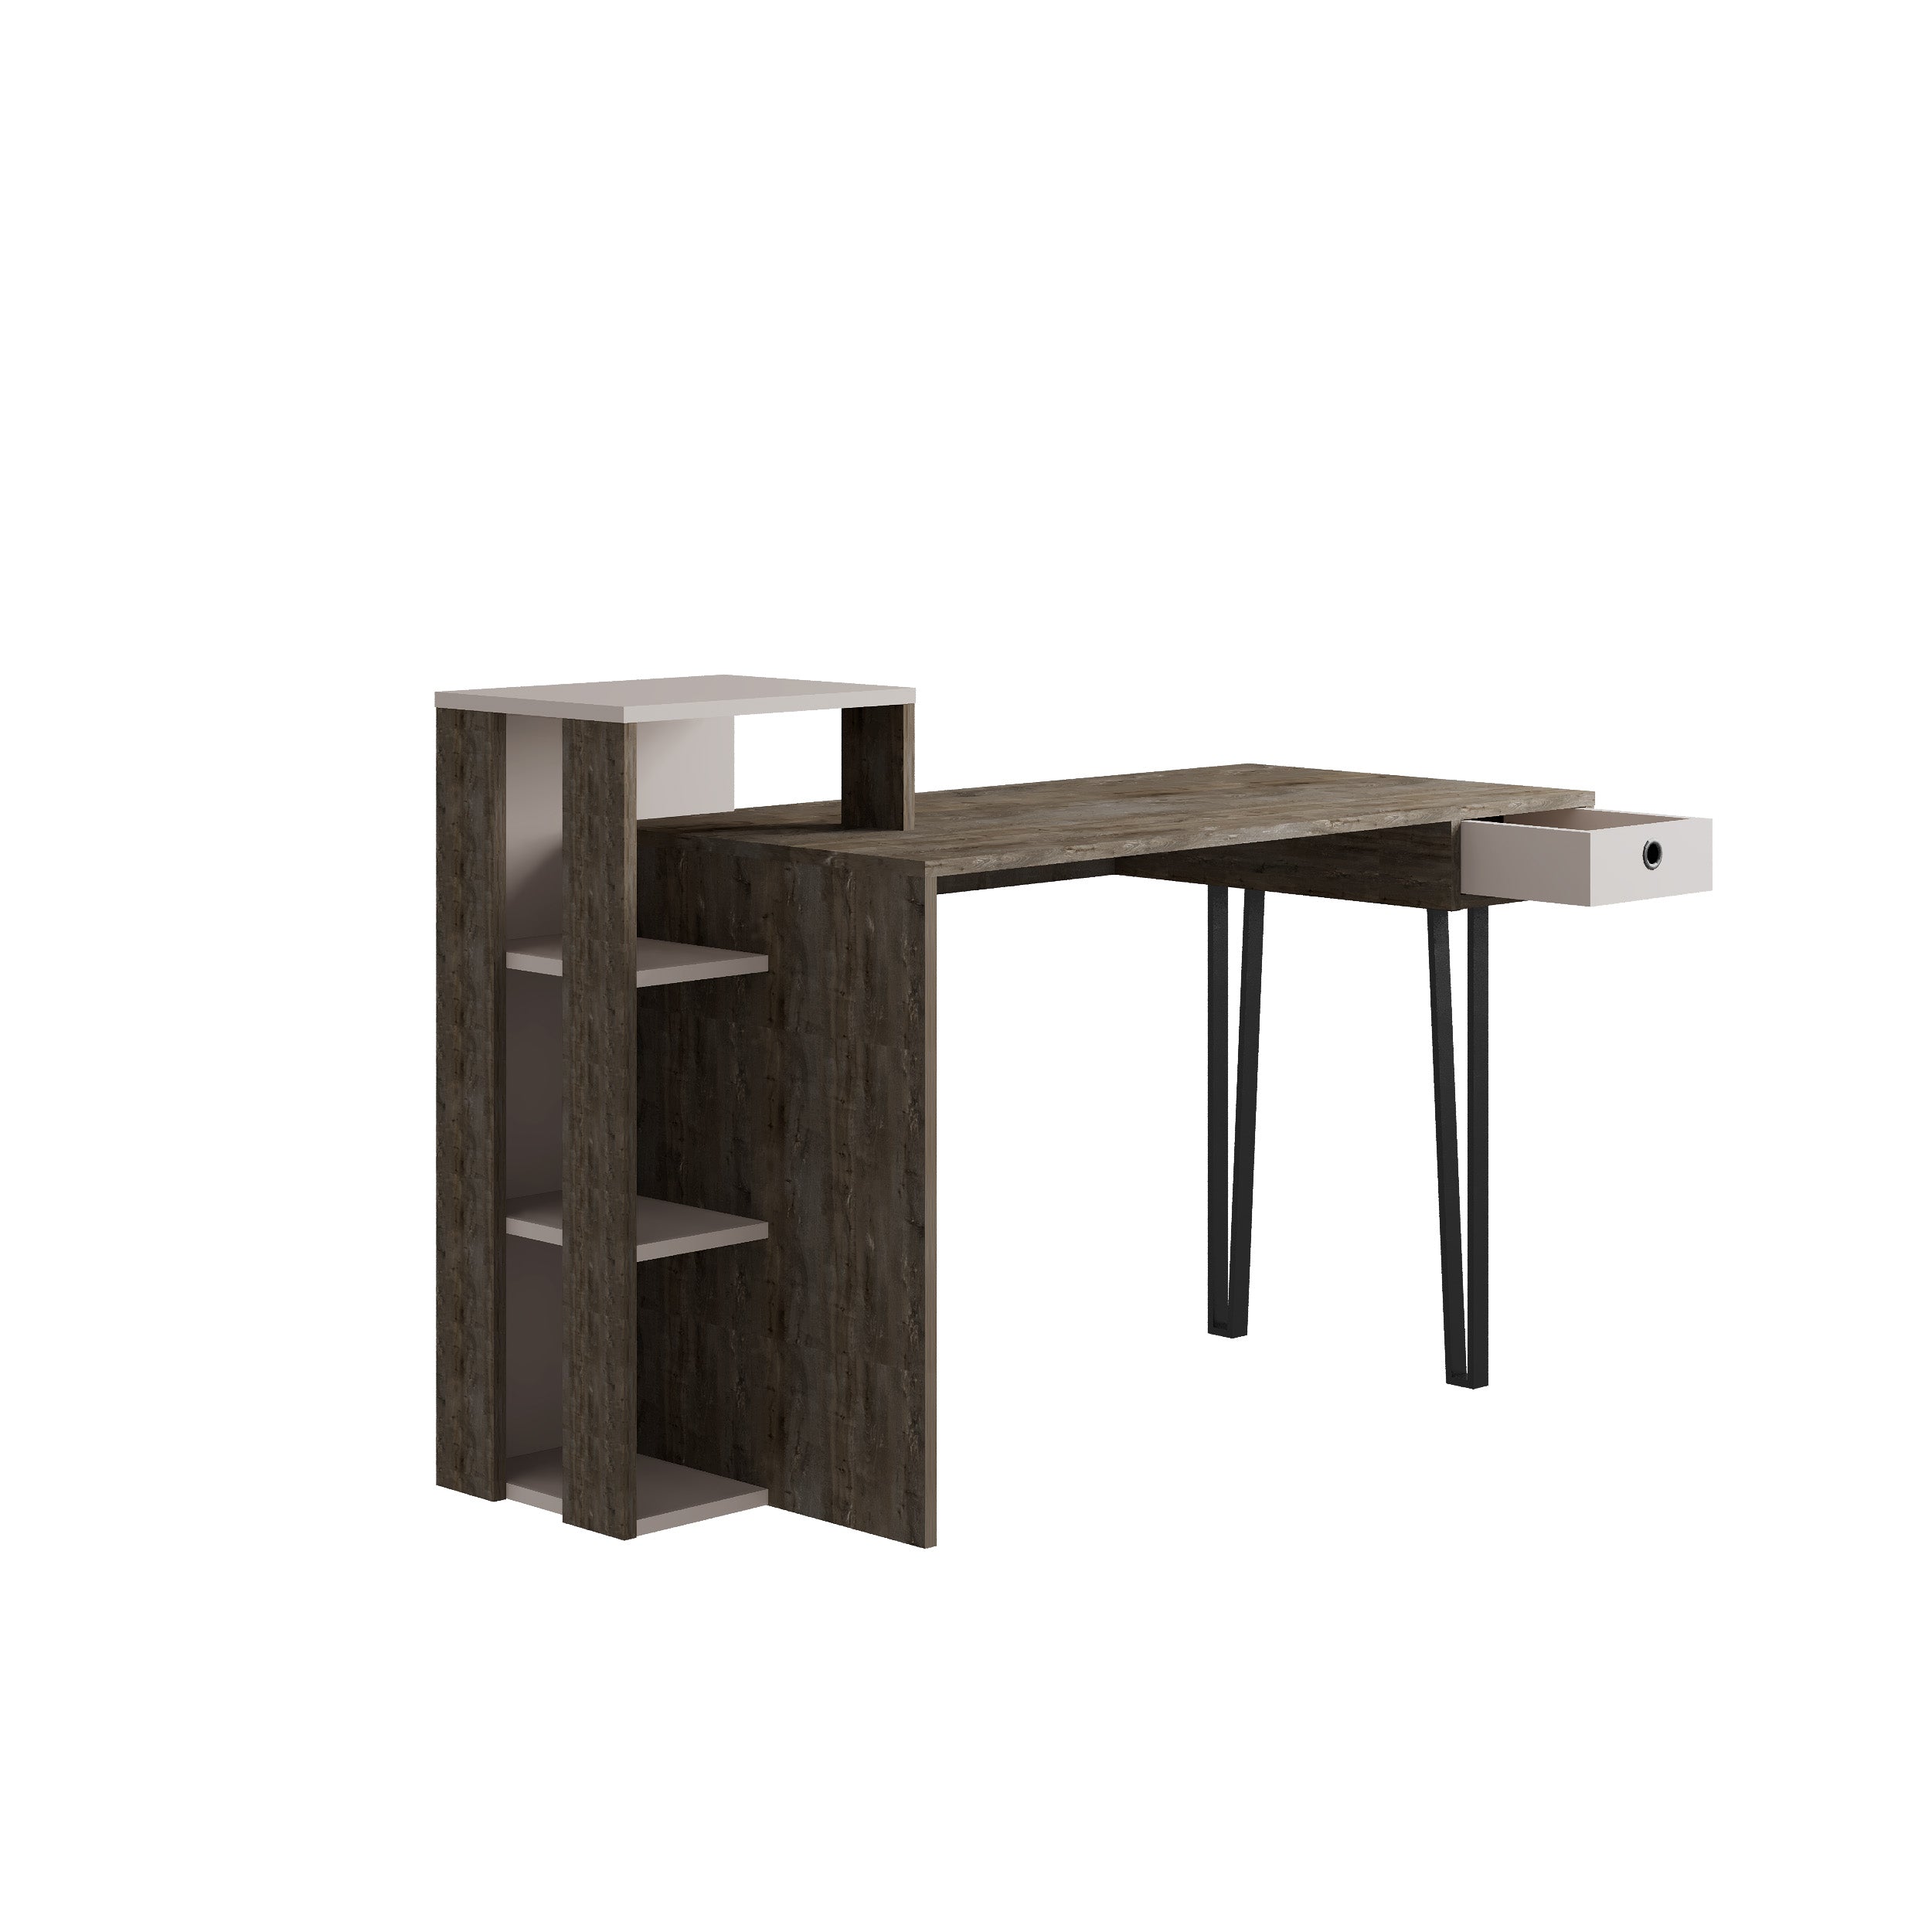 Loyd Study Desk With Drawer And Bookshelves Width 141cm - Decortie